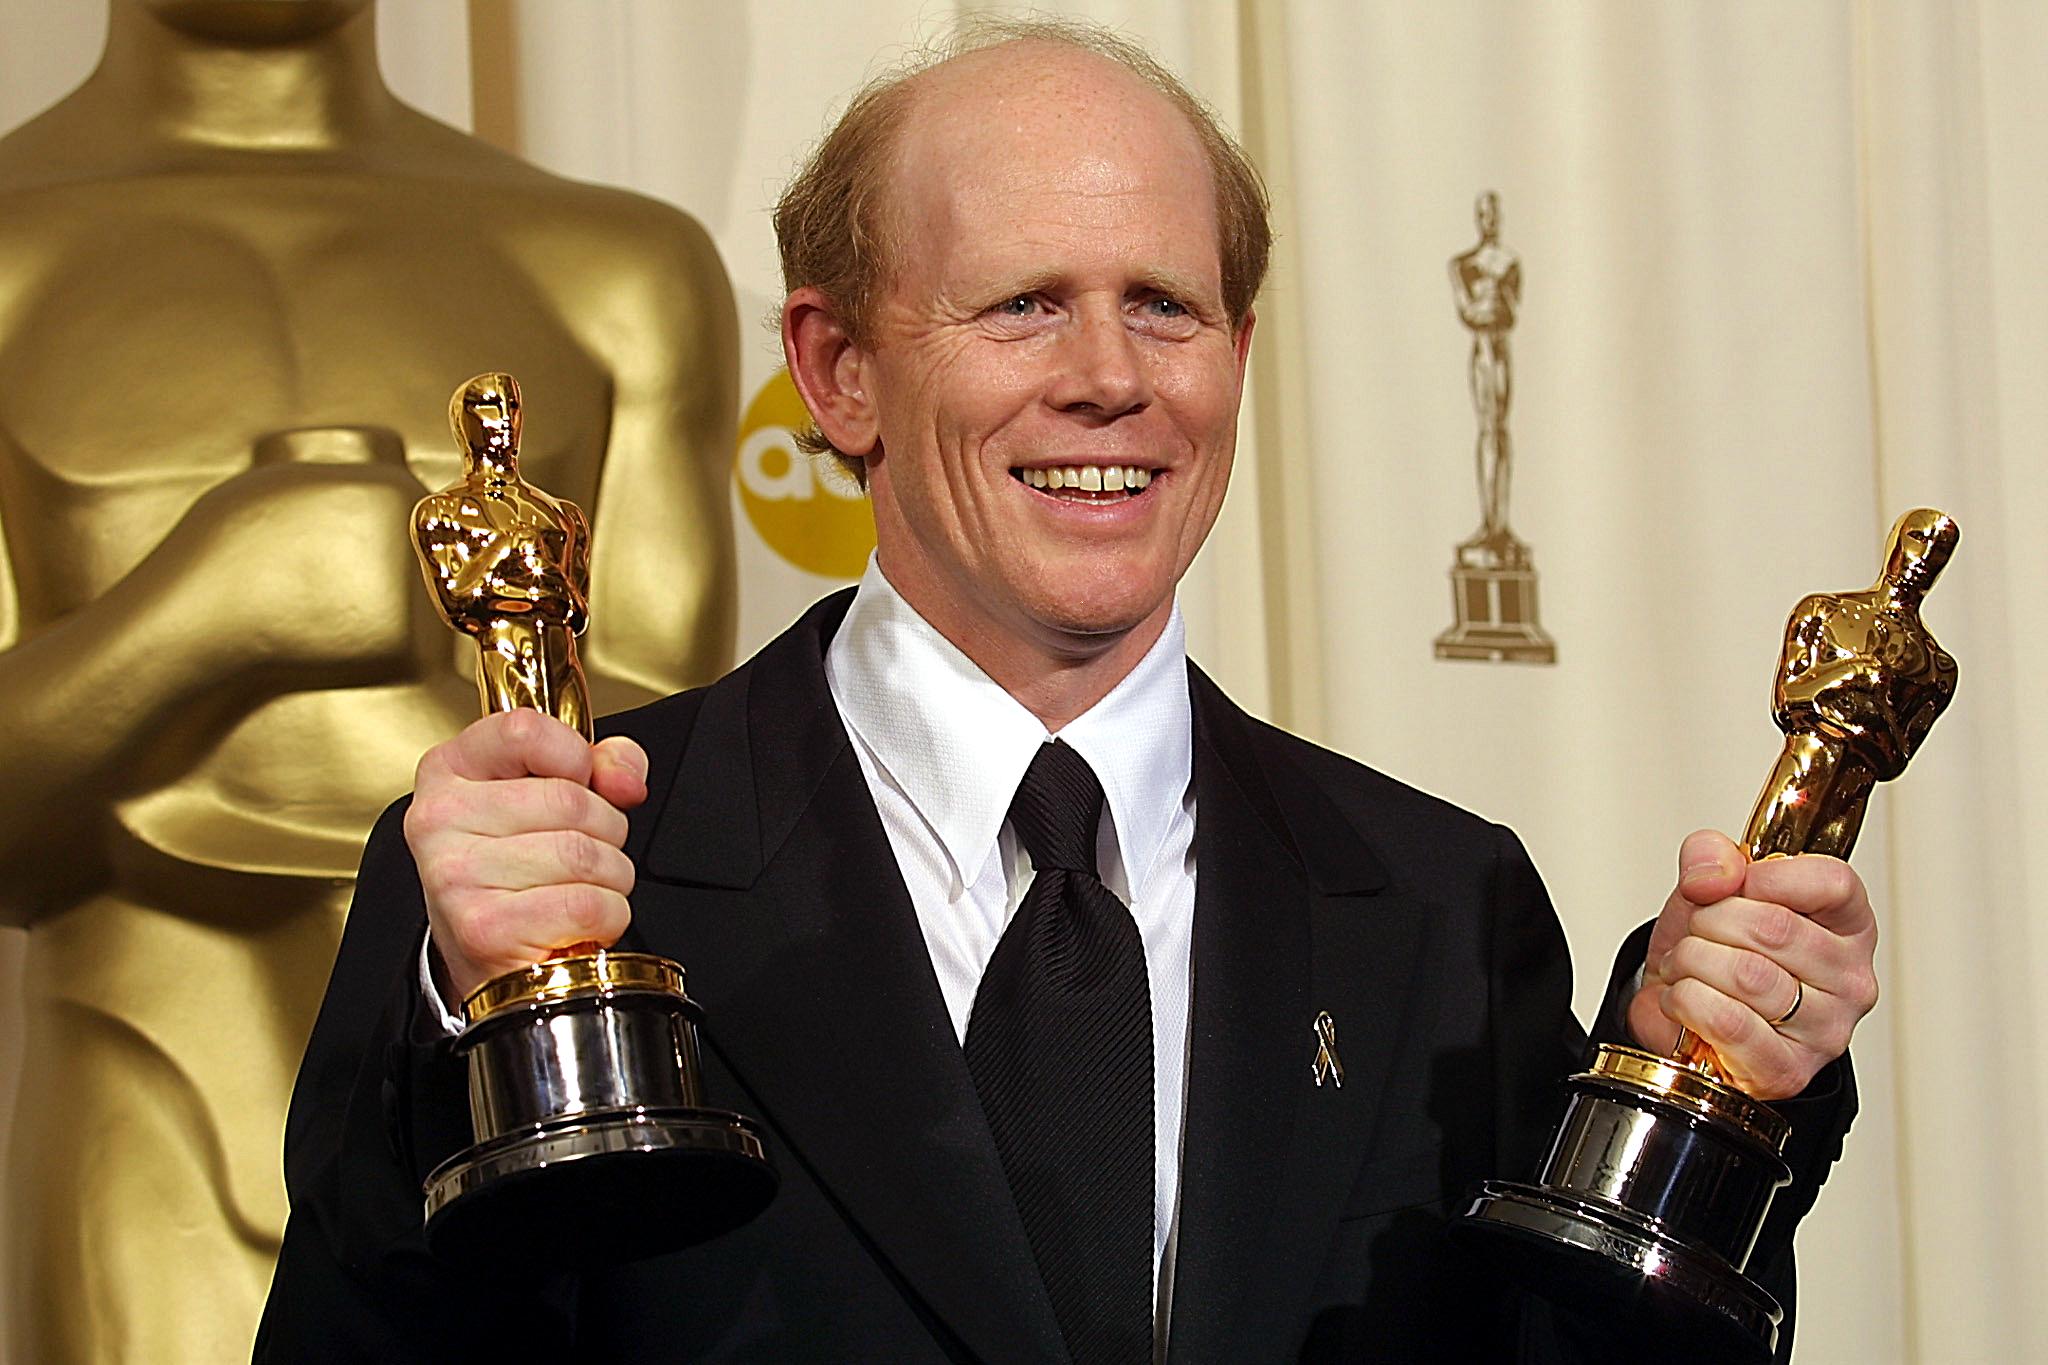 Ron Howard holds his Oscars and smiles.